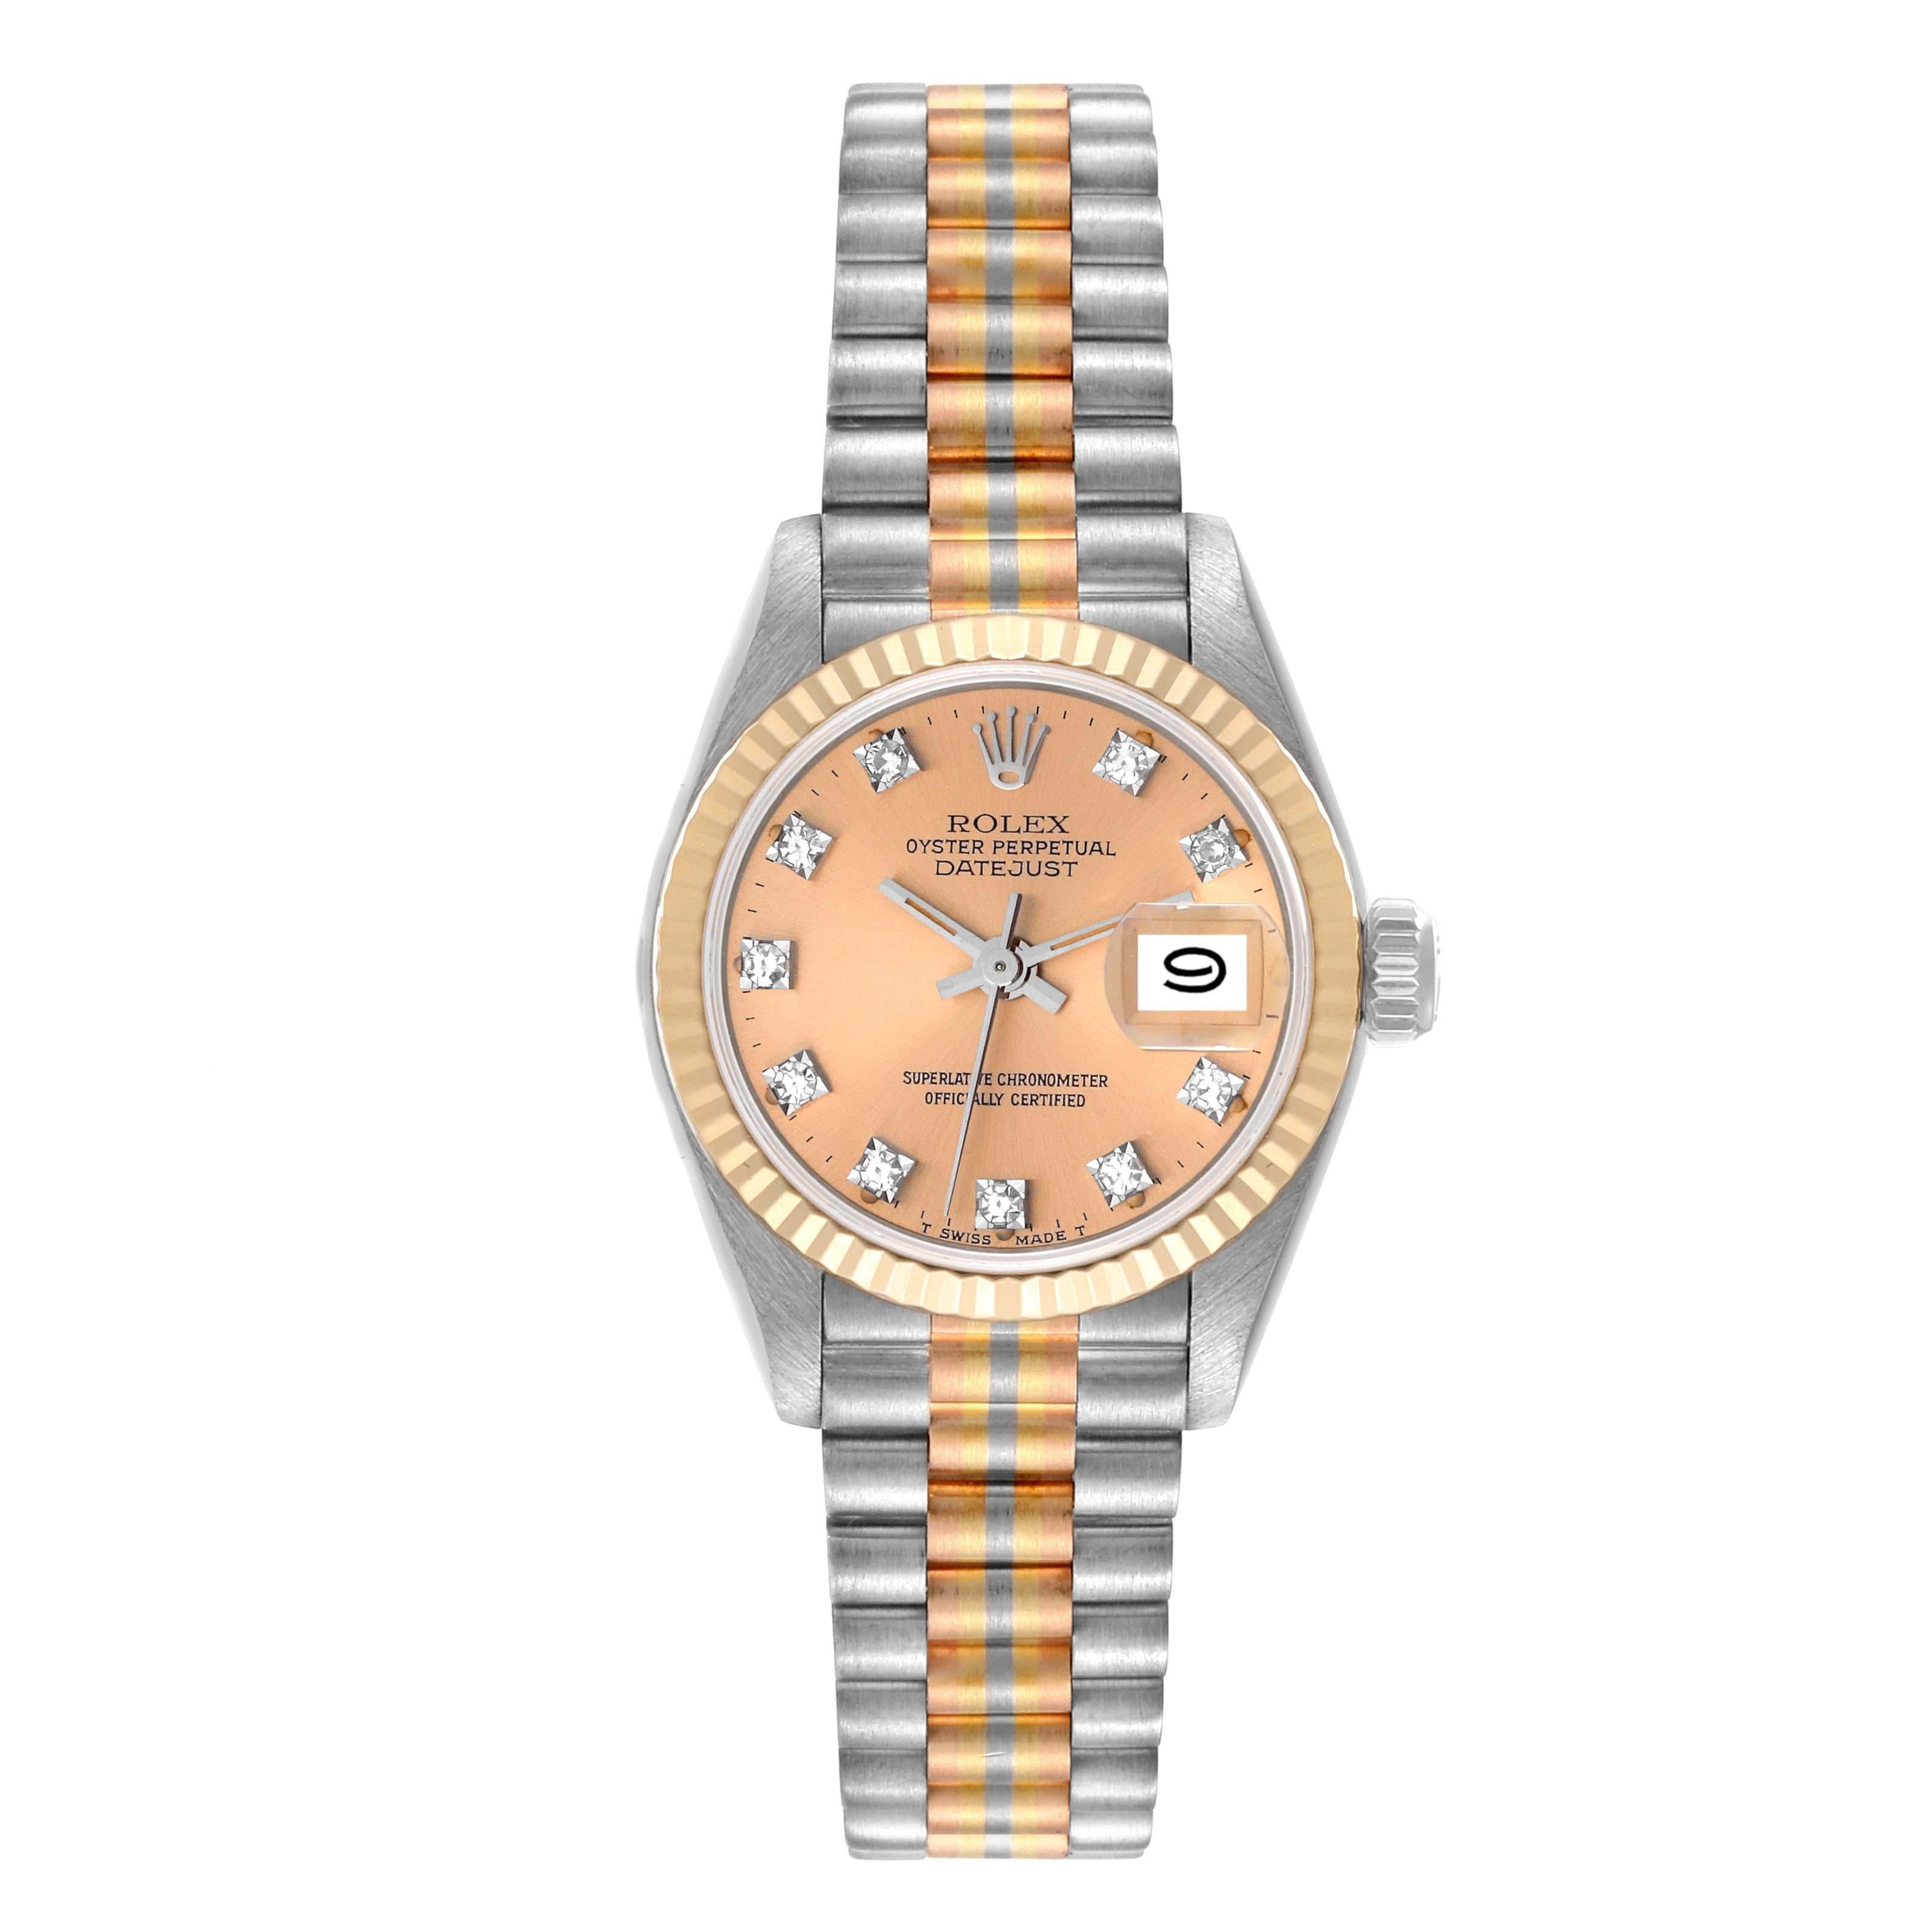 Rolex President Tridor White Yellow Rose Gold Diamond Ladies Watch 69179. Officially certified chronometer self-winding movement. 18k white gold oyster case 26.0 mm in diameter. Rolex logo on crown. 18K yellow gold fluted bezel. Scratch resistant